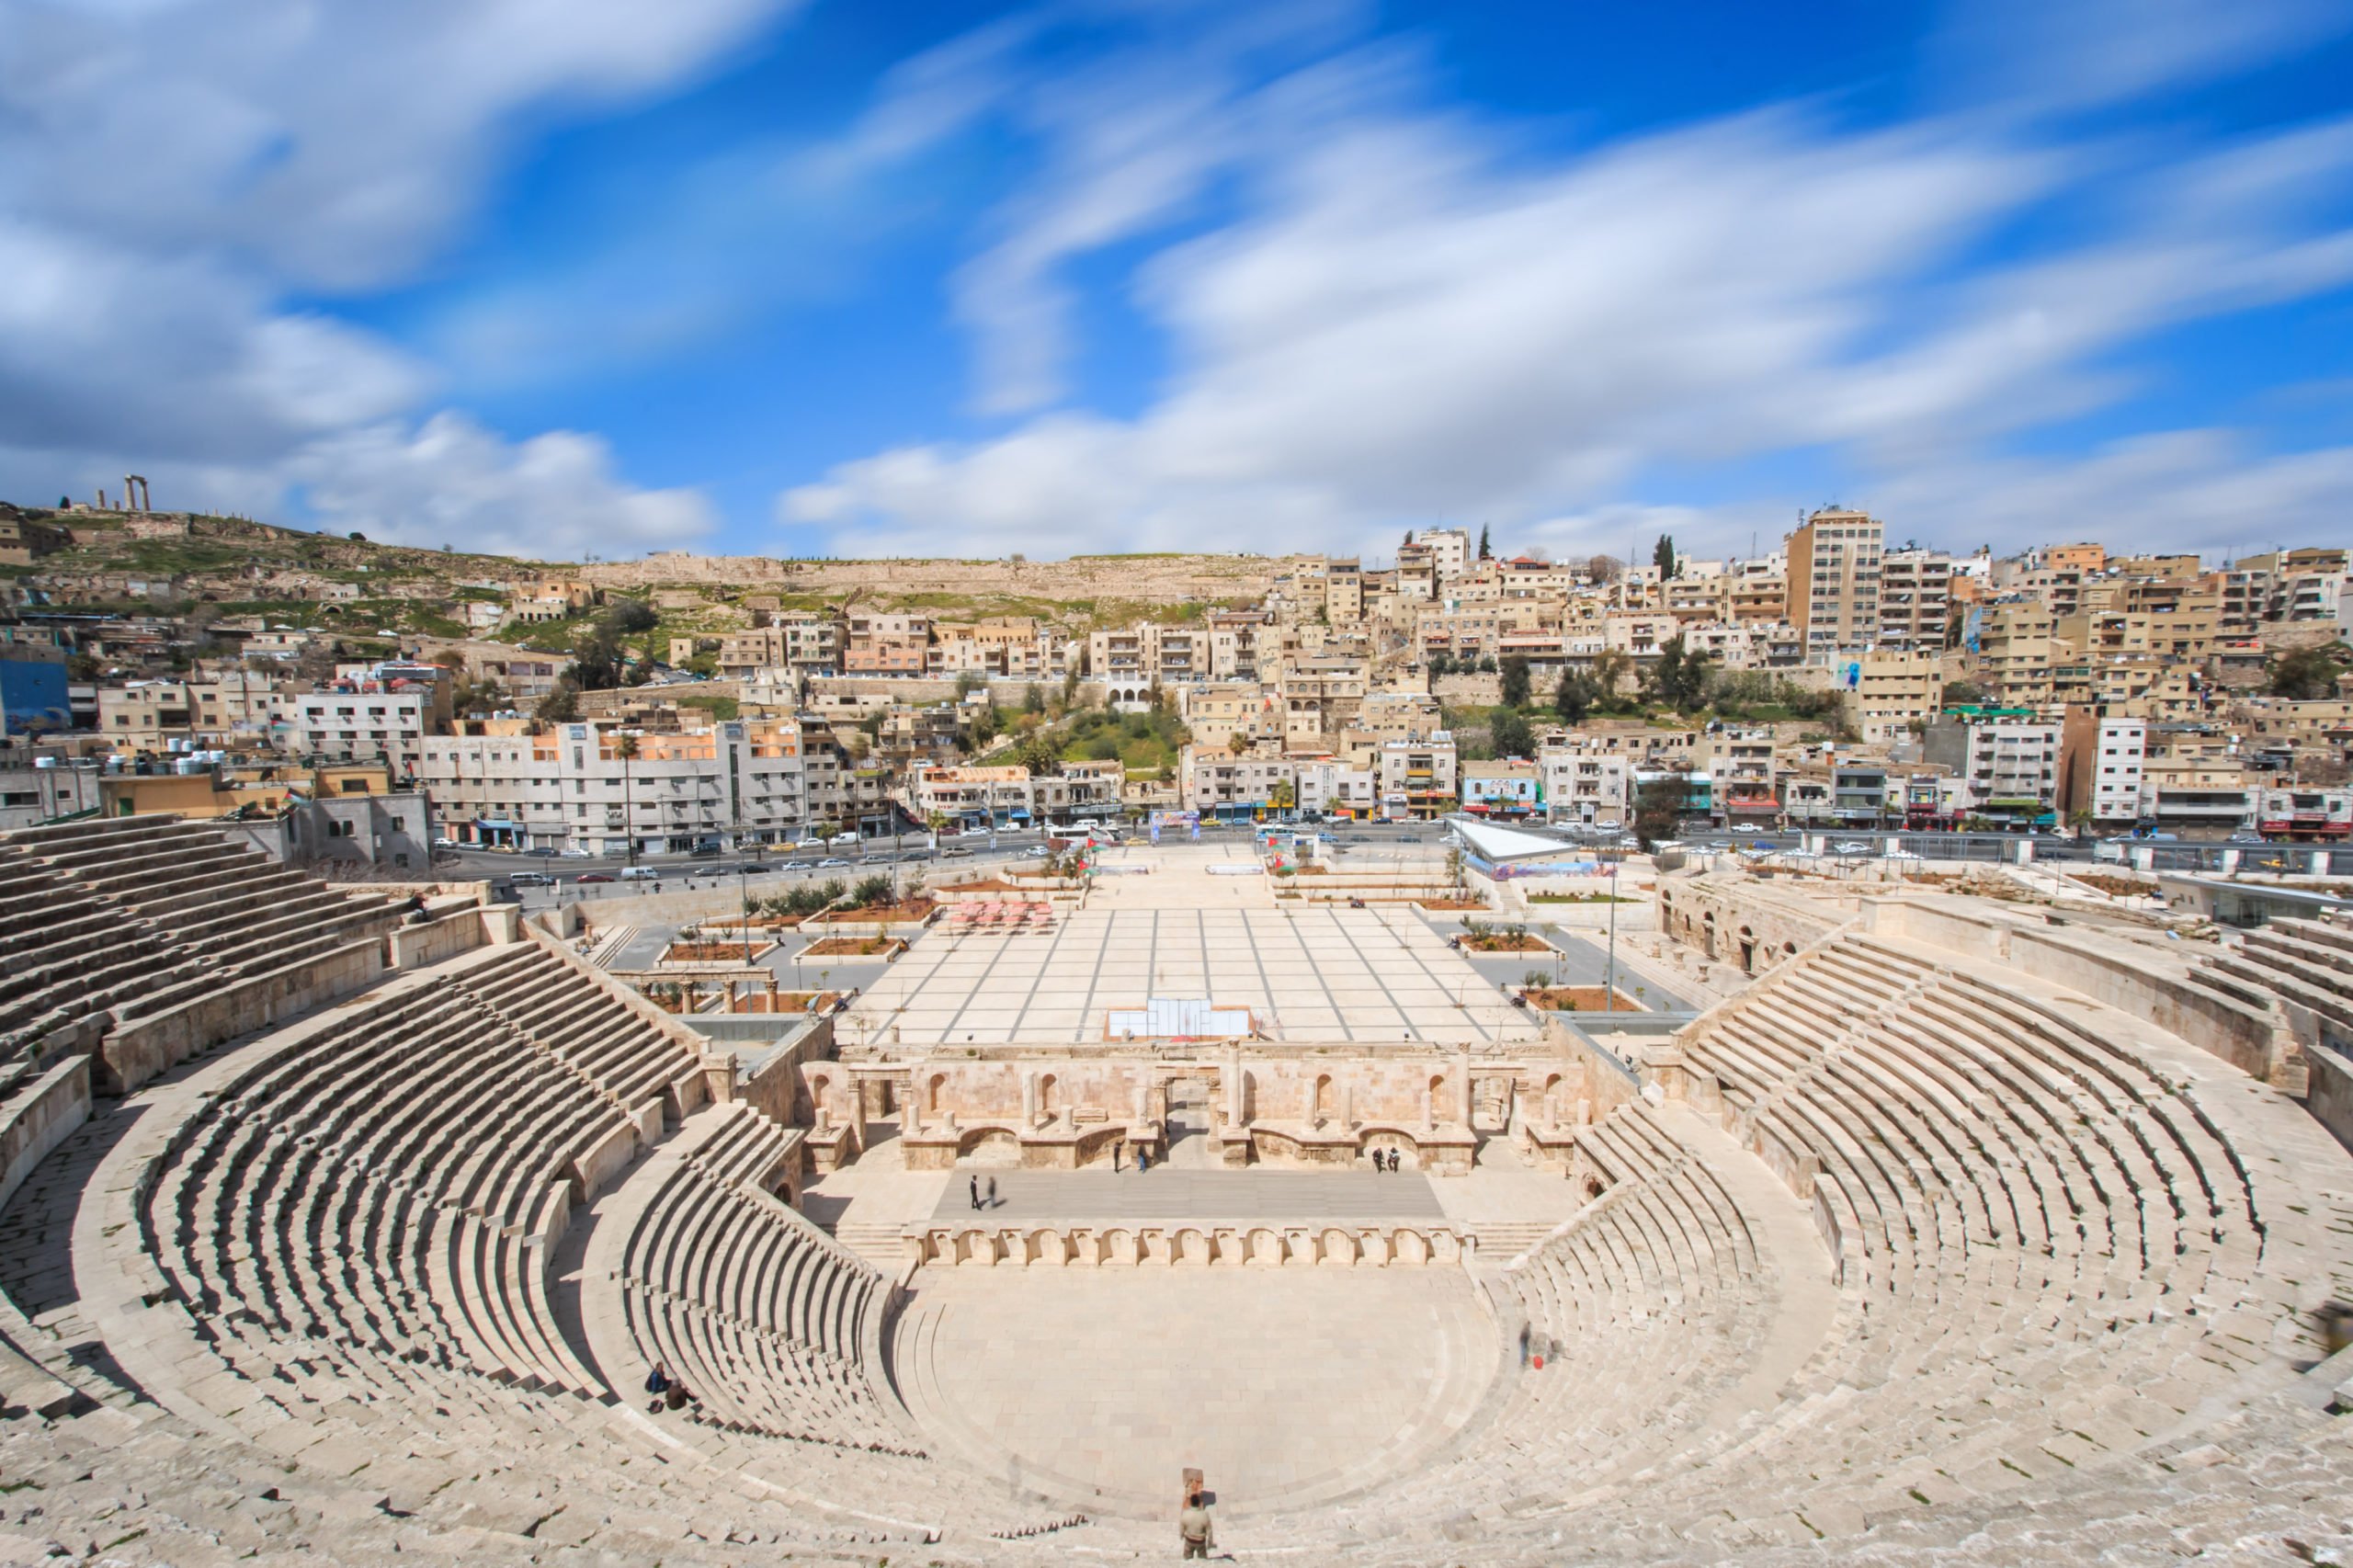 Discover Ammans Capital On The Highlights Of Jordan 4 Day Tour From Amman Or The Dead Sea